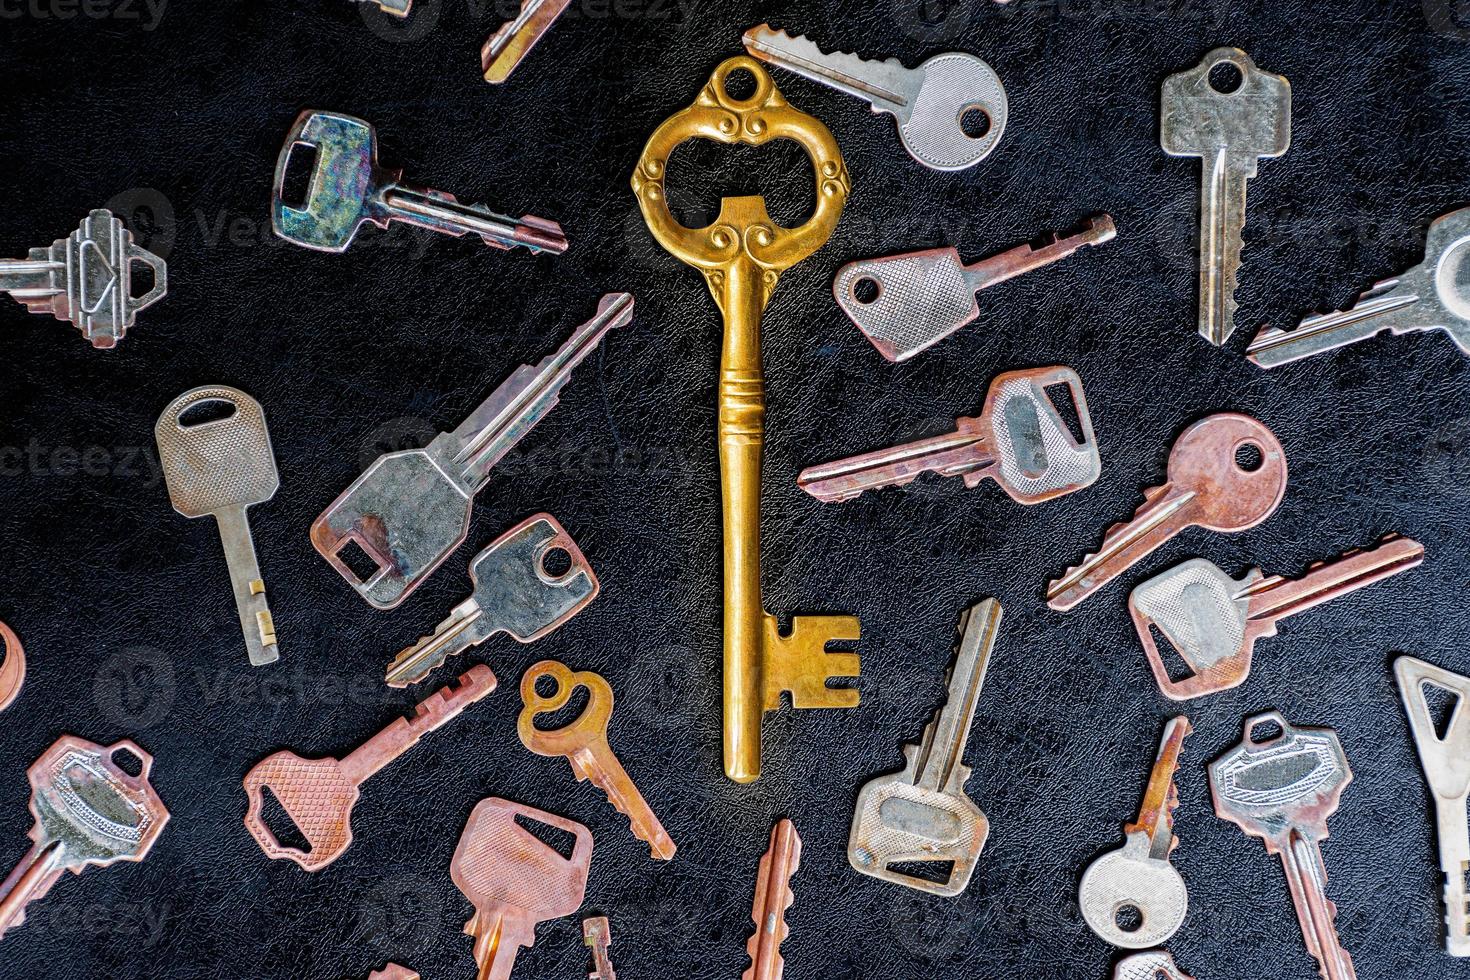 Golden master key in the center of the image. with pattern many keys on black floor photo